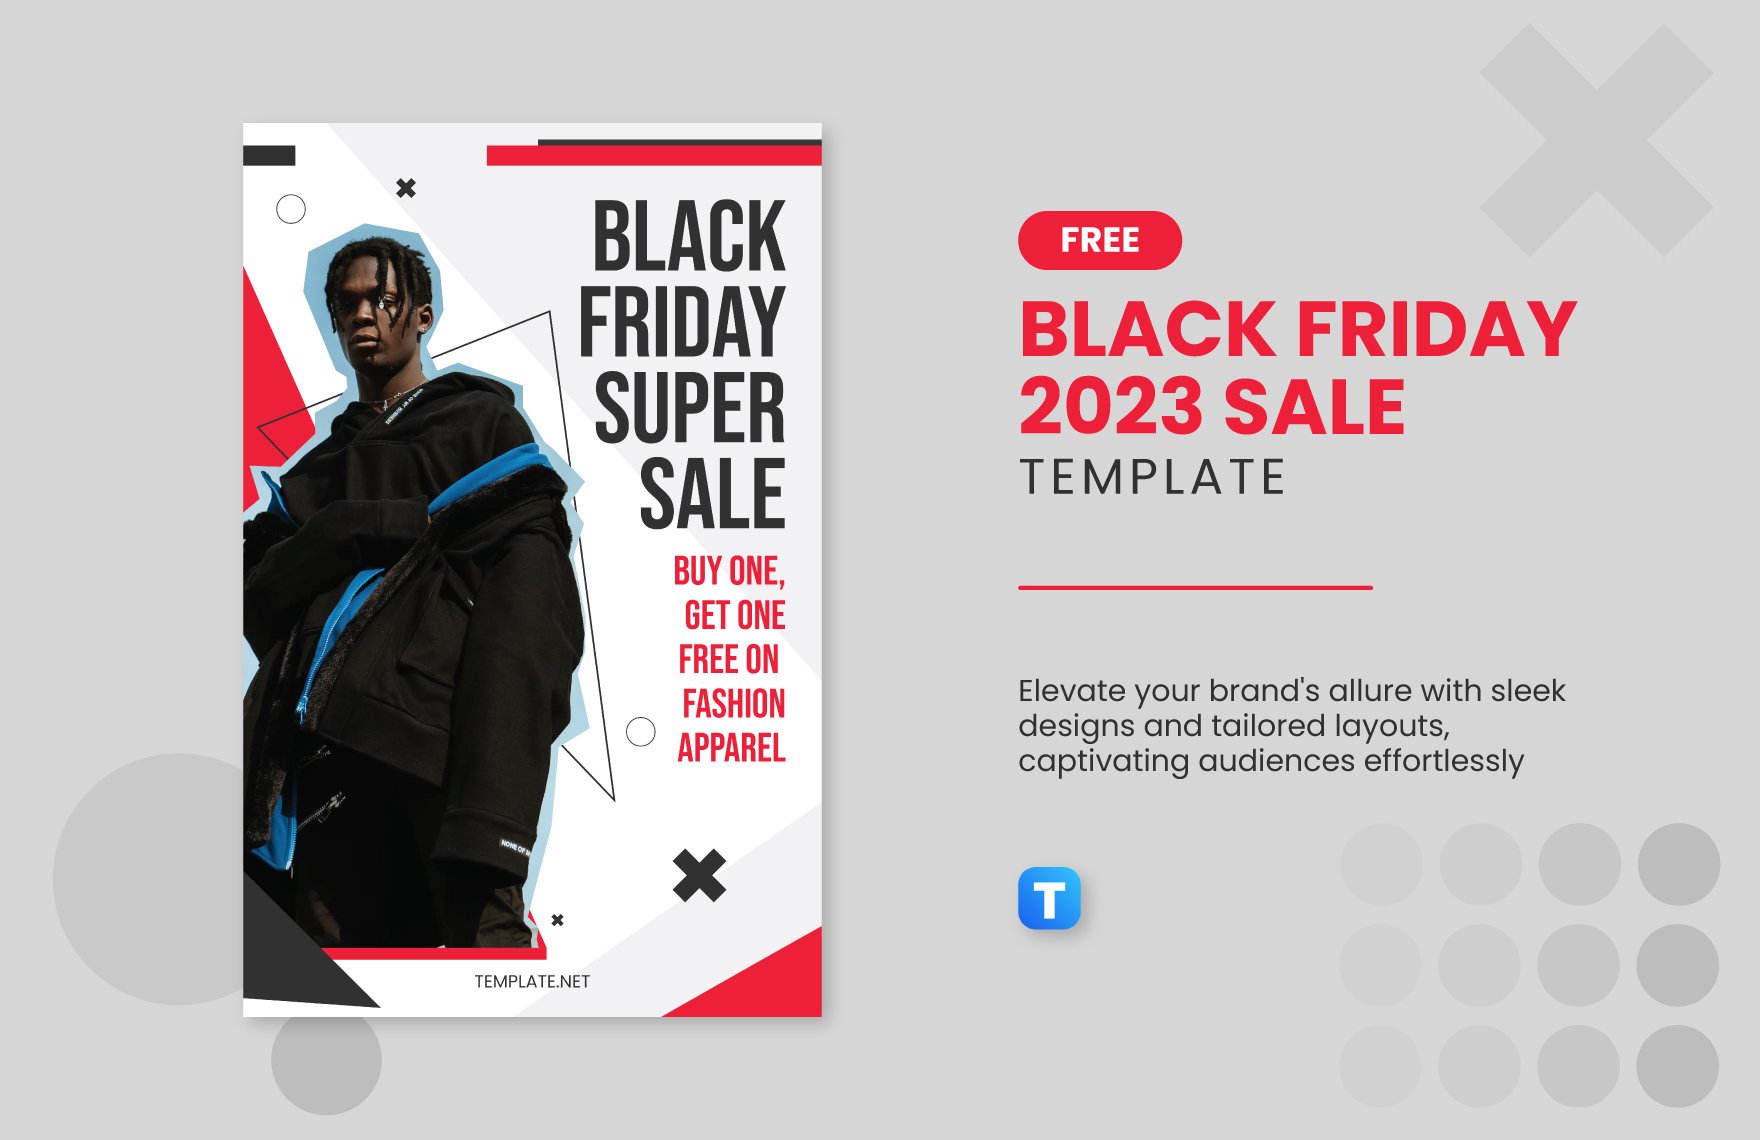 Black Friday 2023 Sale Template